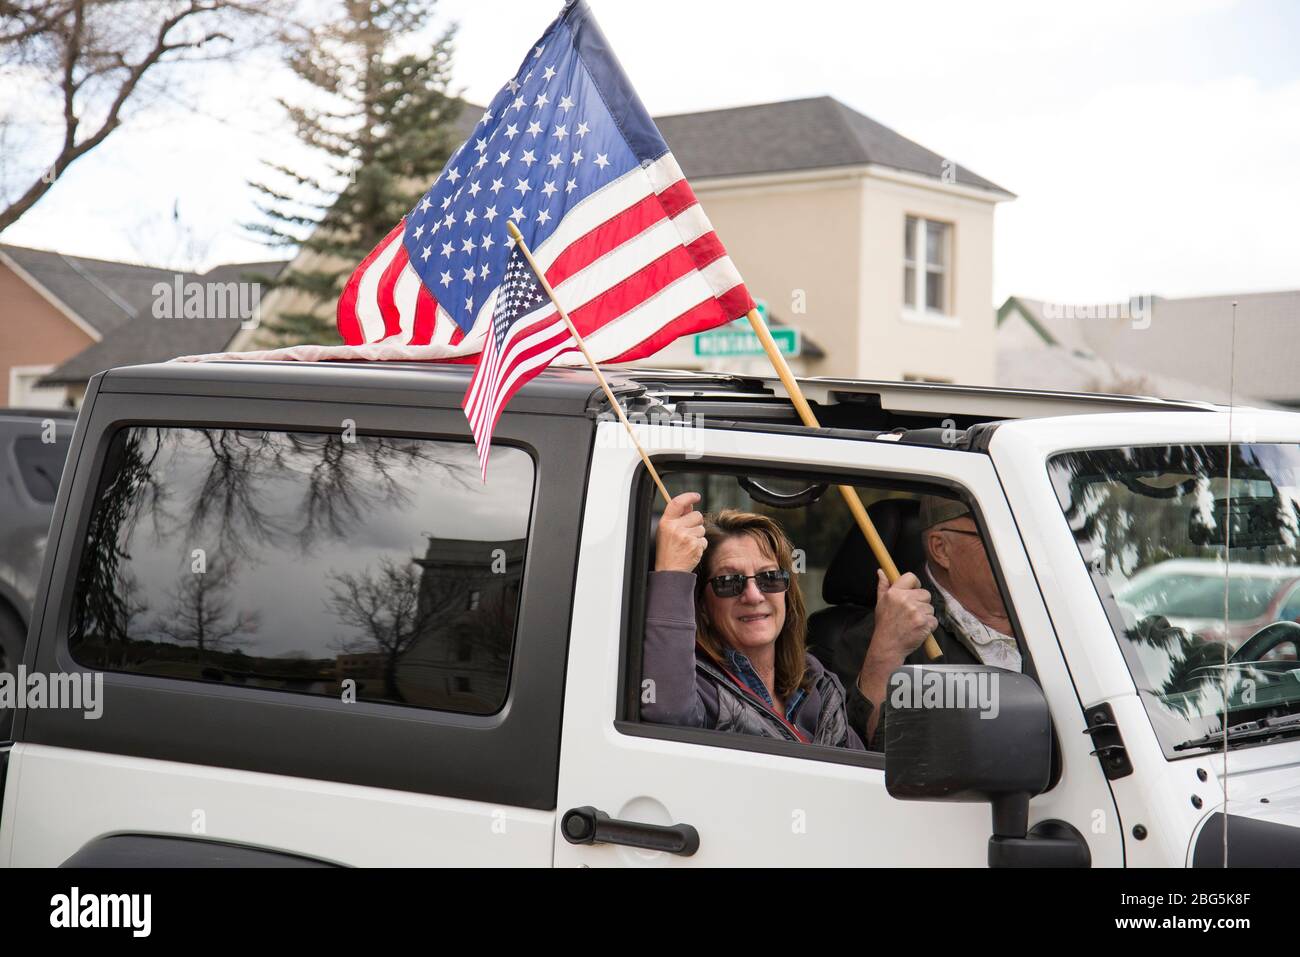 Helena, Montana - April 19, 2020: Man and woman hold American flags in a white jeep at a liberty rally around Capitol Square against government shutdo Stock Photo